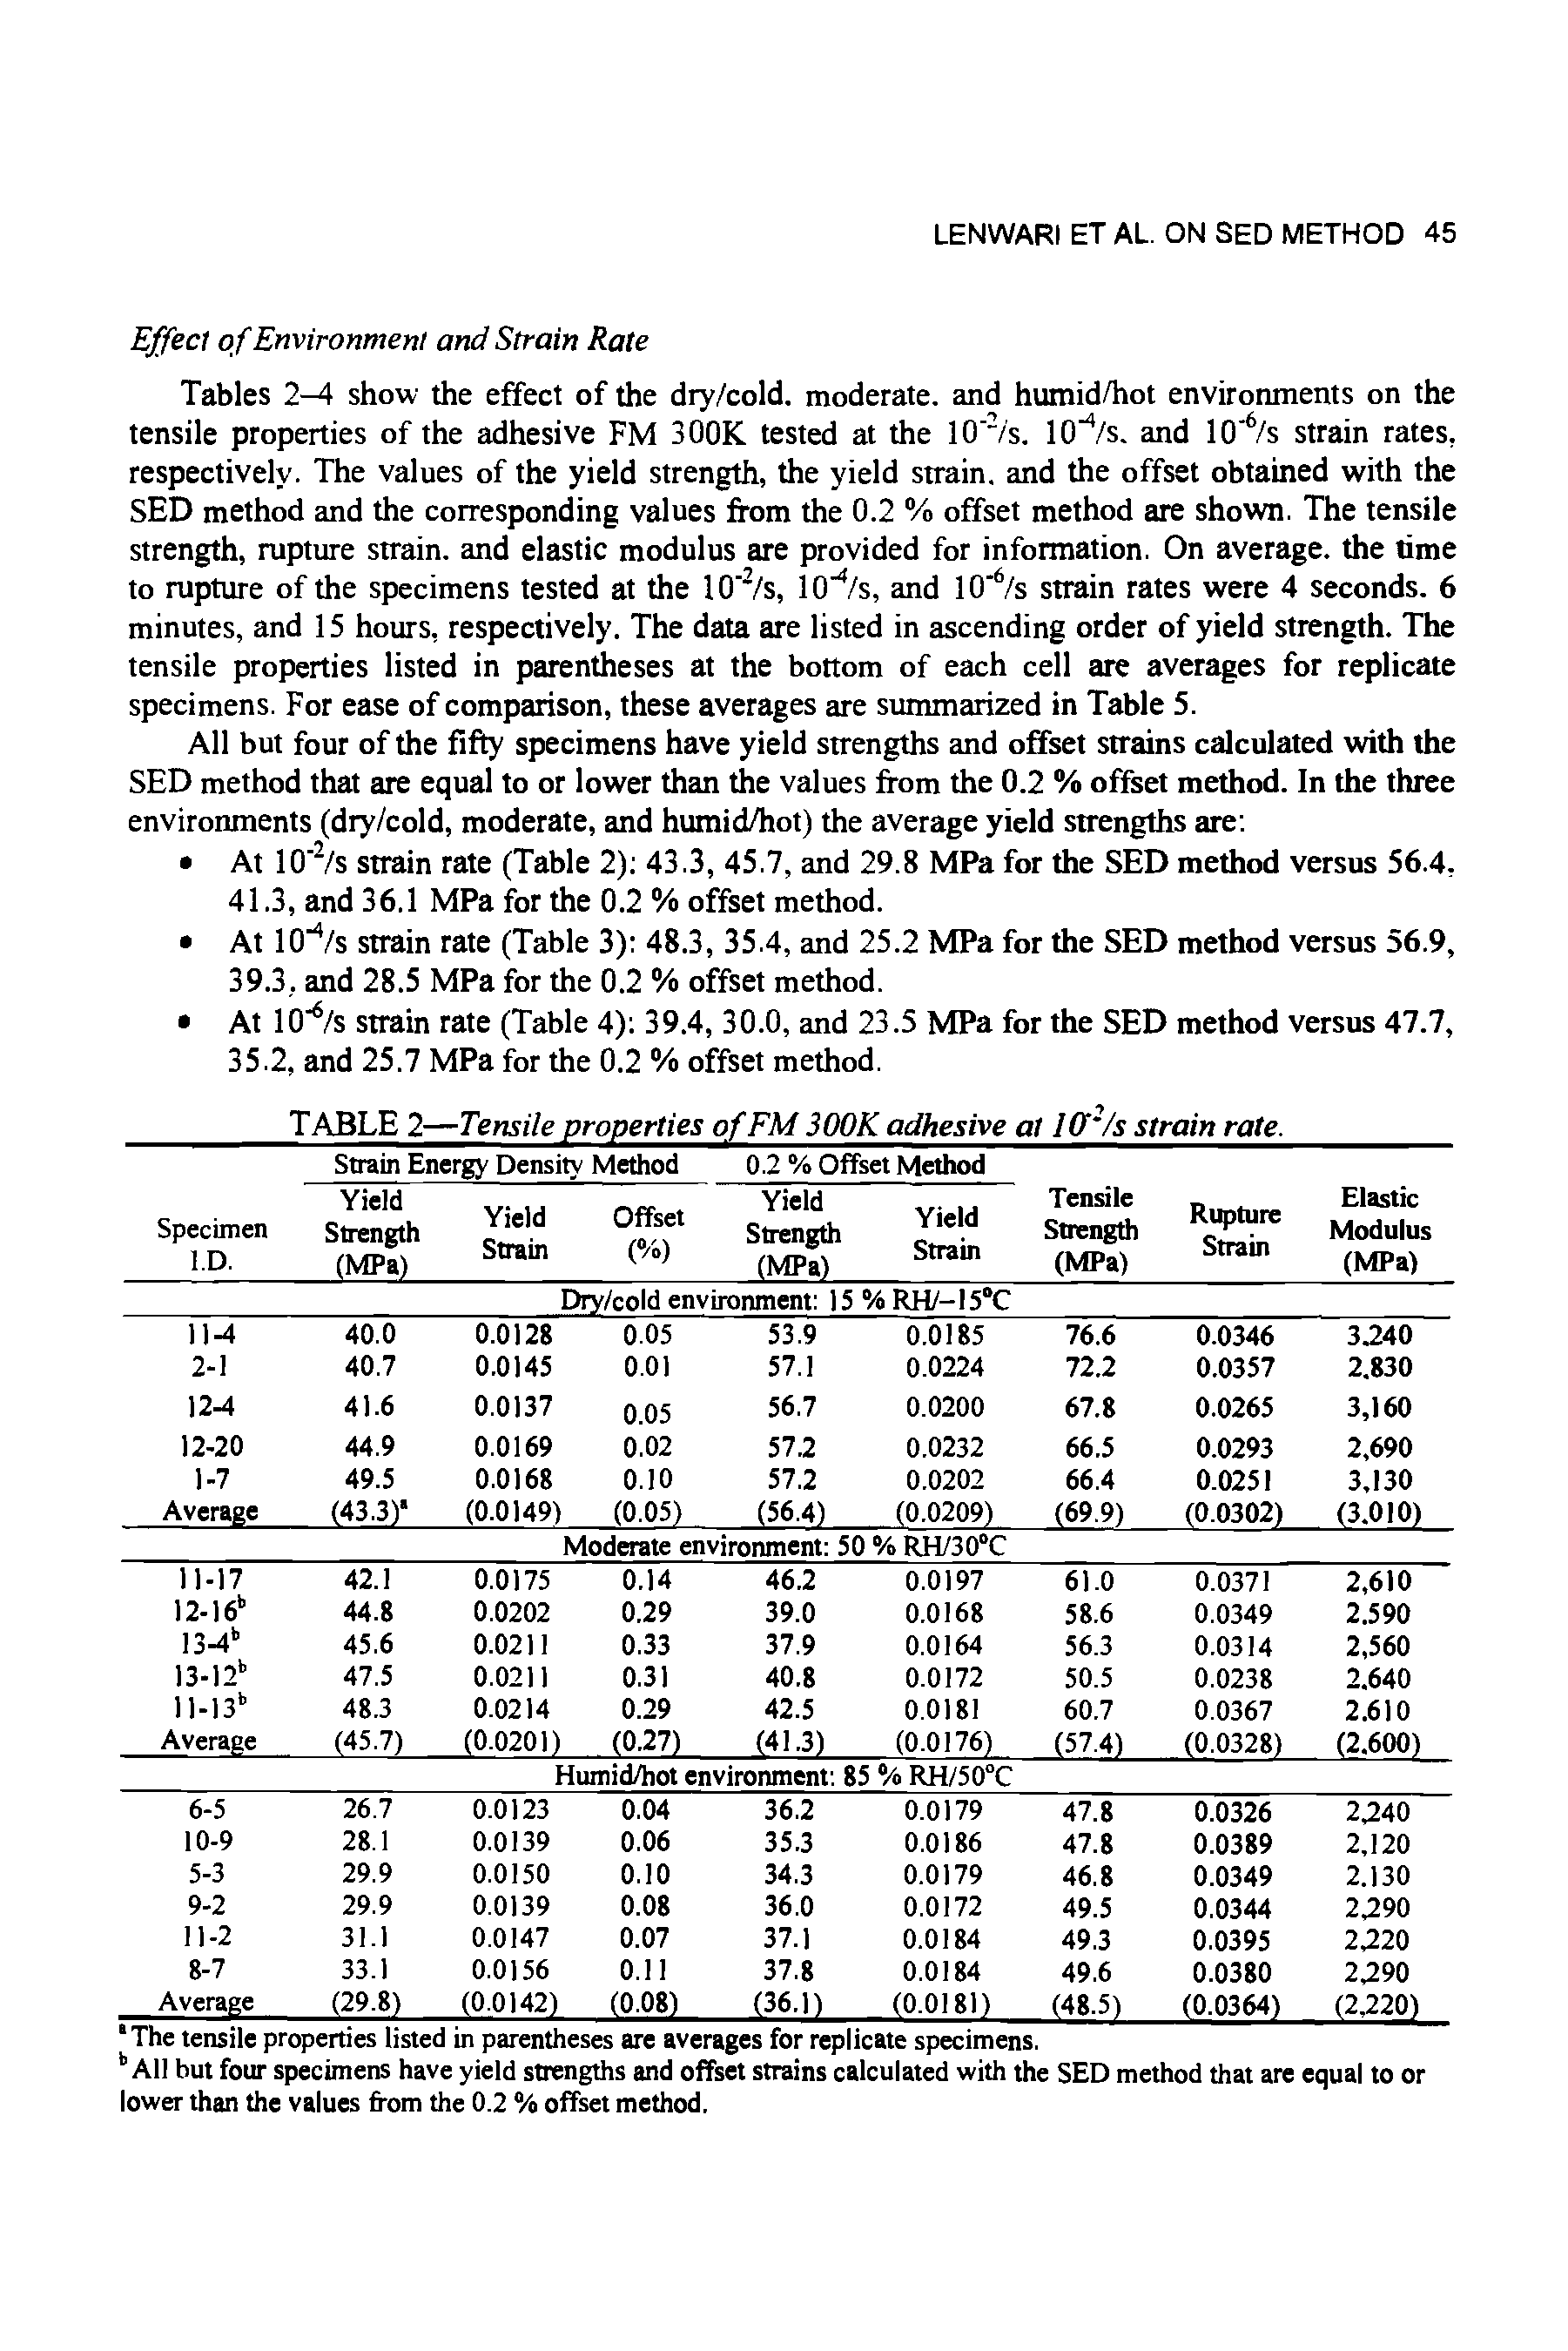 Tables 2-4 show the effect of the dry/cold. moderate, and humid/hot environments on the tensile properties of the adhesive FM 300K tested at the 10 "/s. lO /s. and lO Vs strain rates, respectively. The values of the yield strength, the yield strain, and the offset obtained with the SED method and the corresponding values from the 0.2 % offset method are shown. The tensile strength, rupture strain, and elastic modulus are provided for information. On average, the time to rupture of the specimens tested at the lO /s, lO /s, and lO Vs strain rates were 4 seconds. 6 minutes, and 15 hours, respectively. The data are listed in ascending order of yield strength. The tensile properties listed in parentheses at the bottom of each cell are averages for replicate specimens. For ease of comparison, these averages are summarized in Table 5.